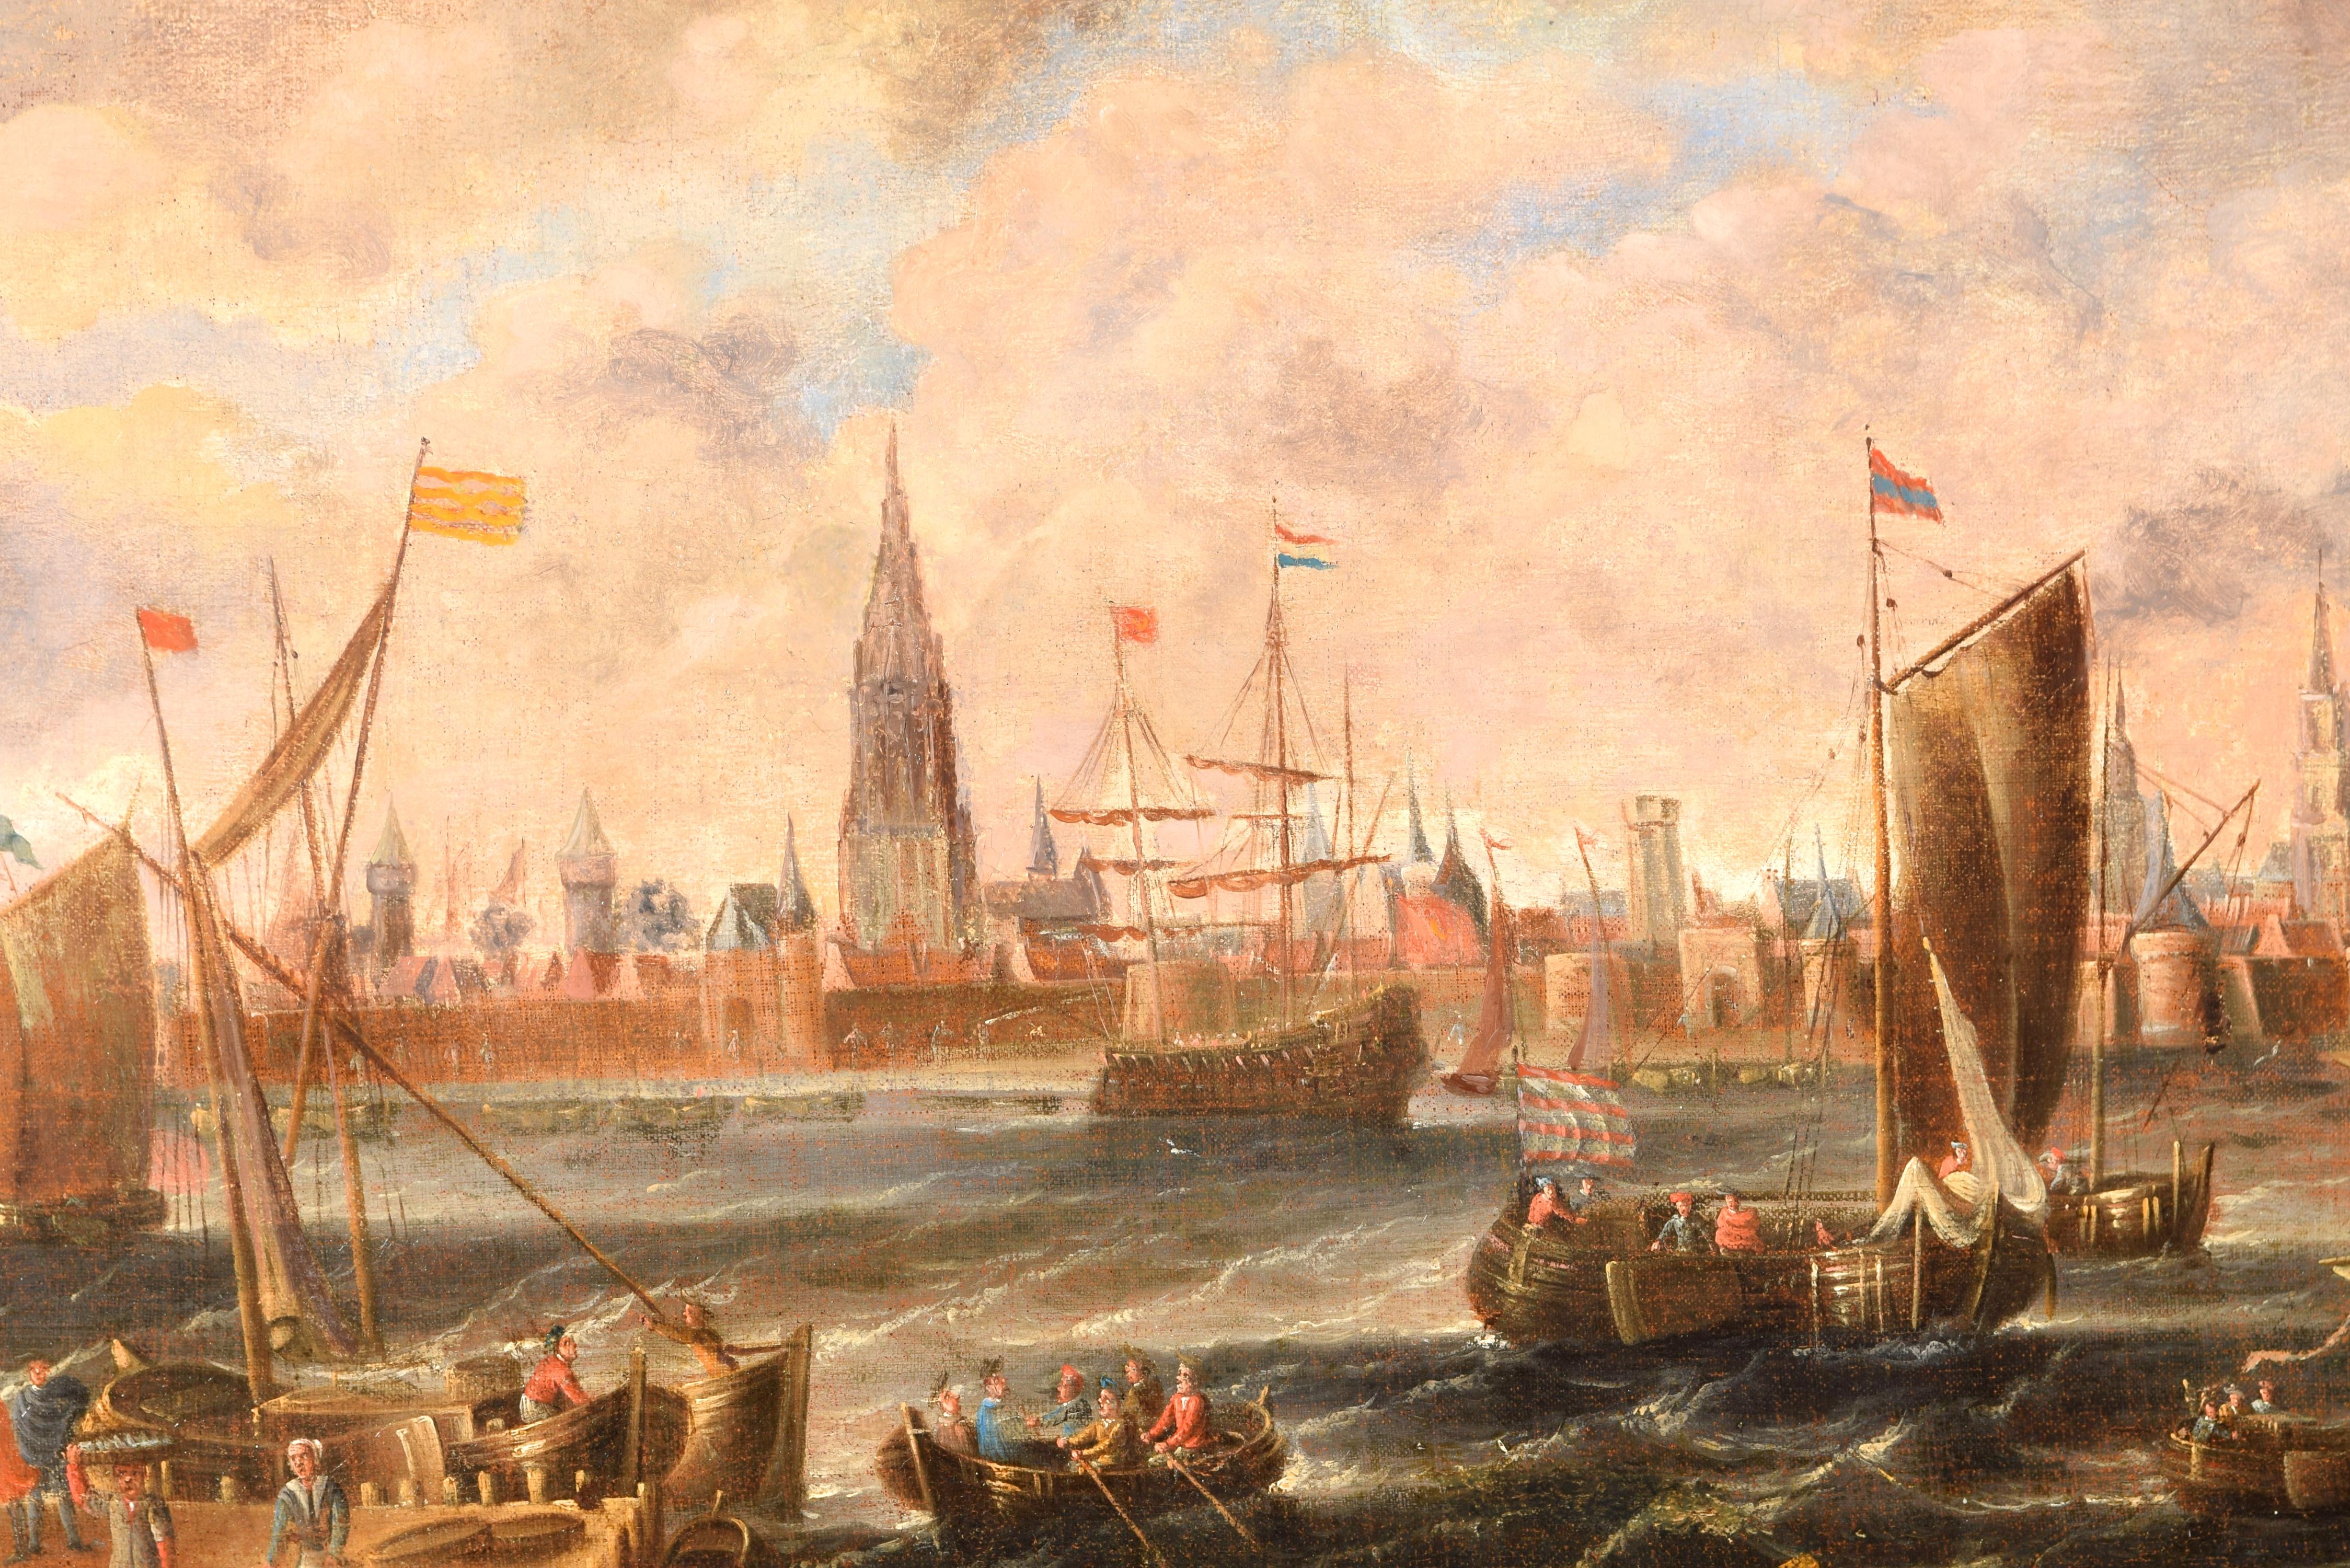 View of the pier of Antwerp. Oil on canvas. Flemish school, 18th century. 
Numerous ships and boats appear in the landscape, accompanied by small characters. In the background a city stands out, with walls, houses, towers, etc., among which a tall